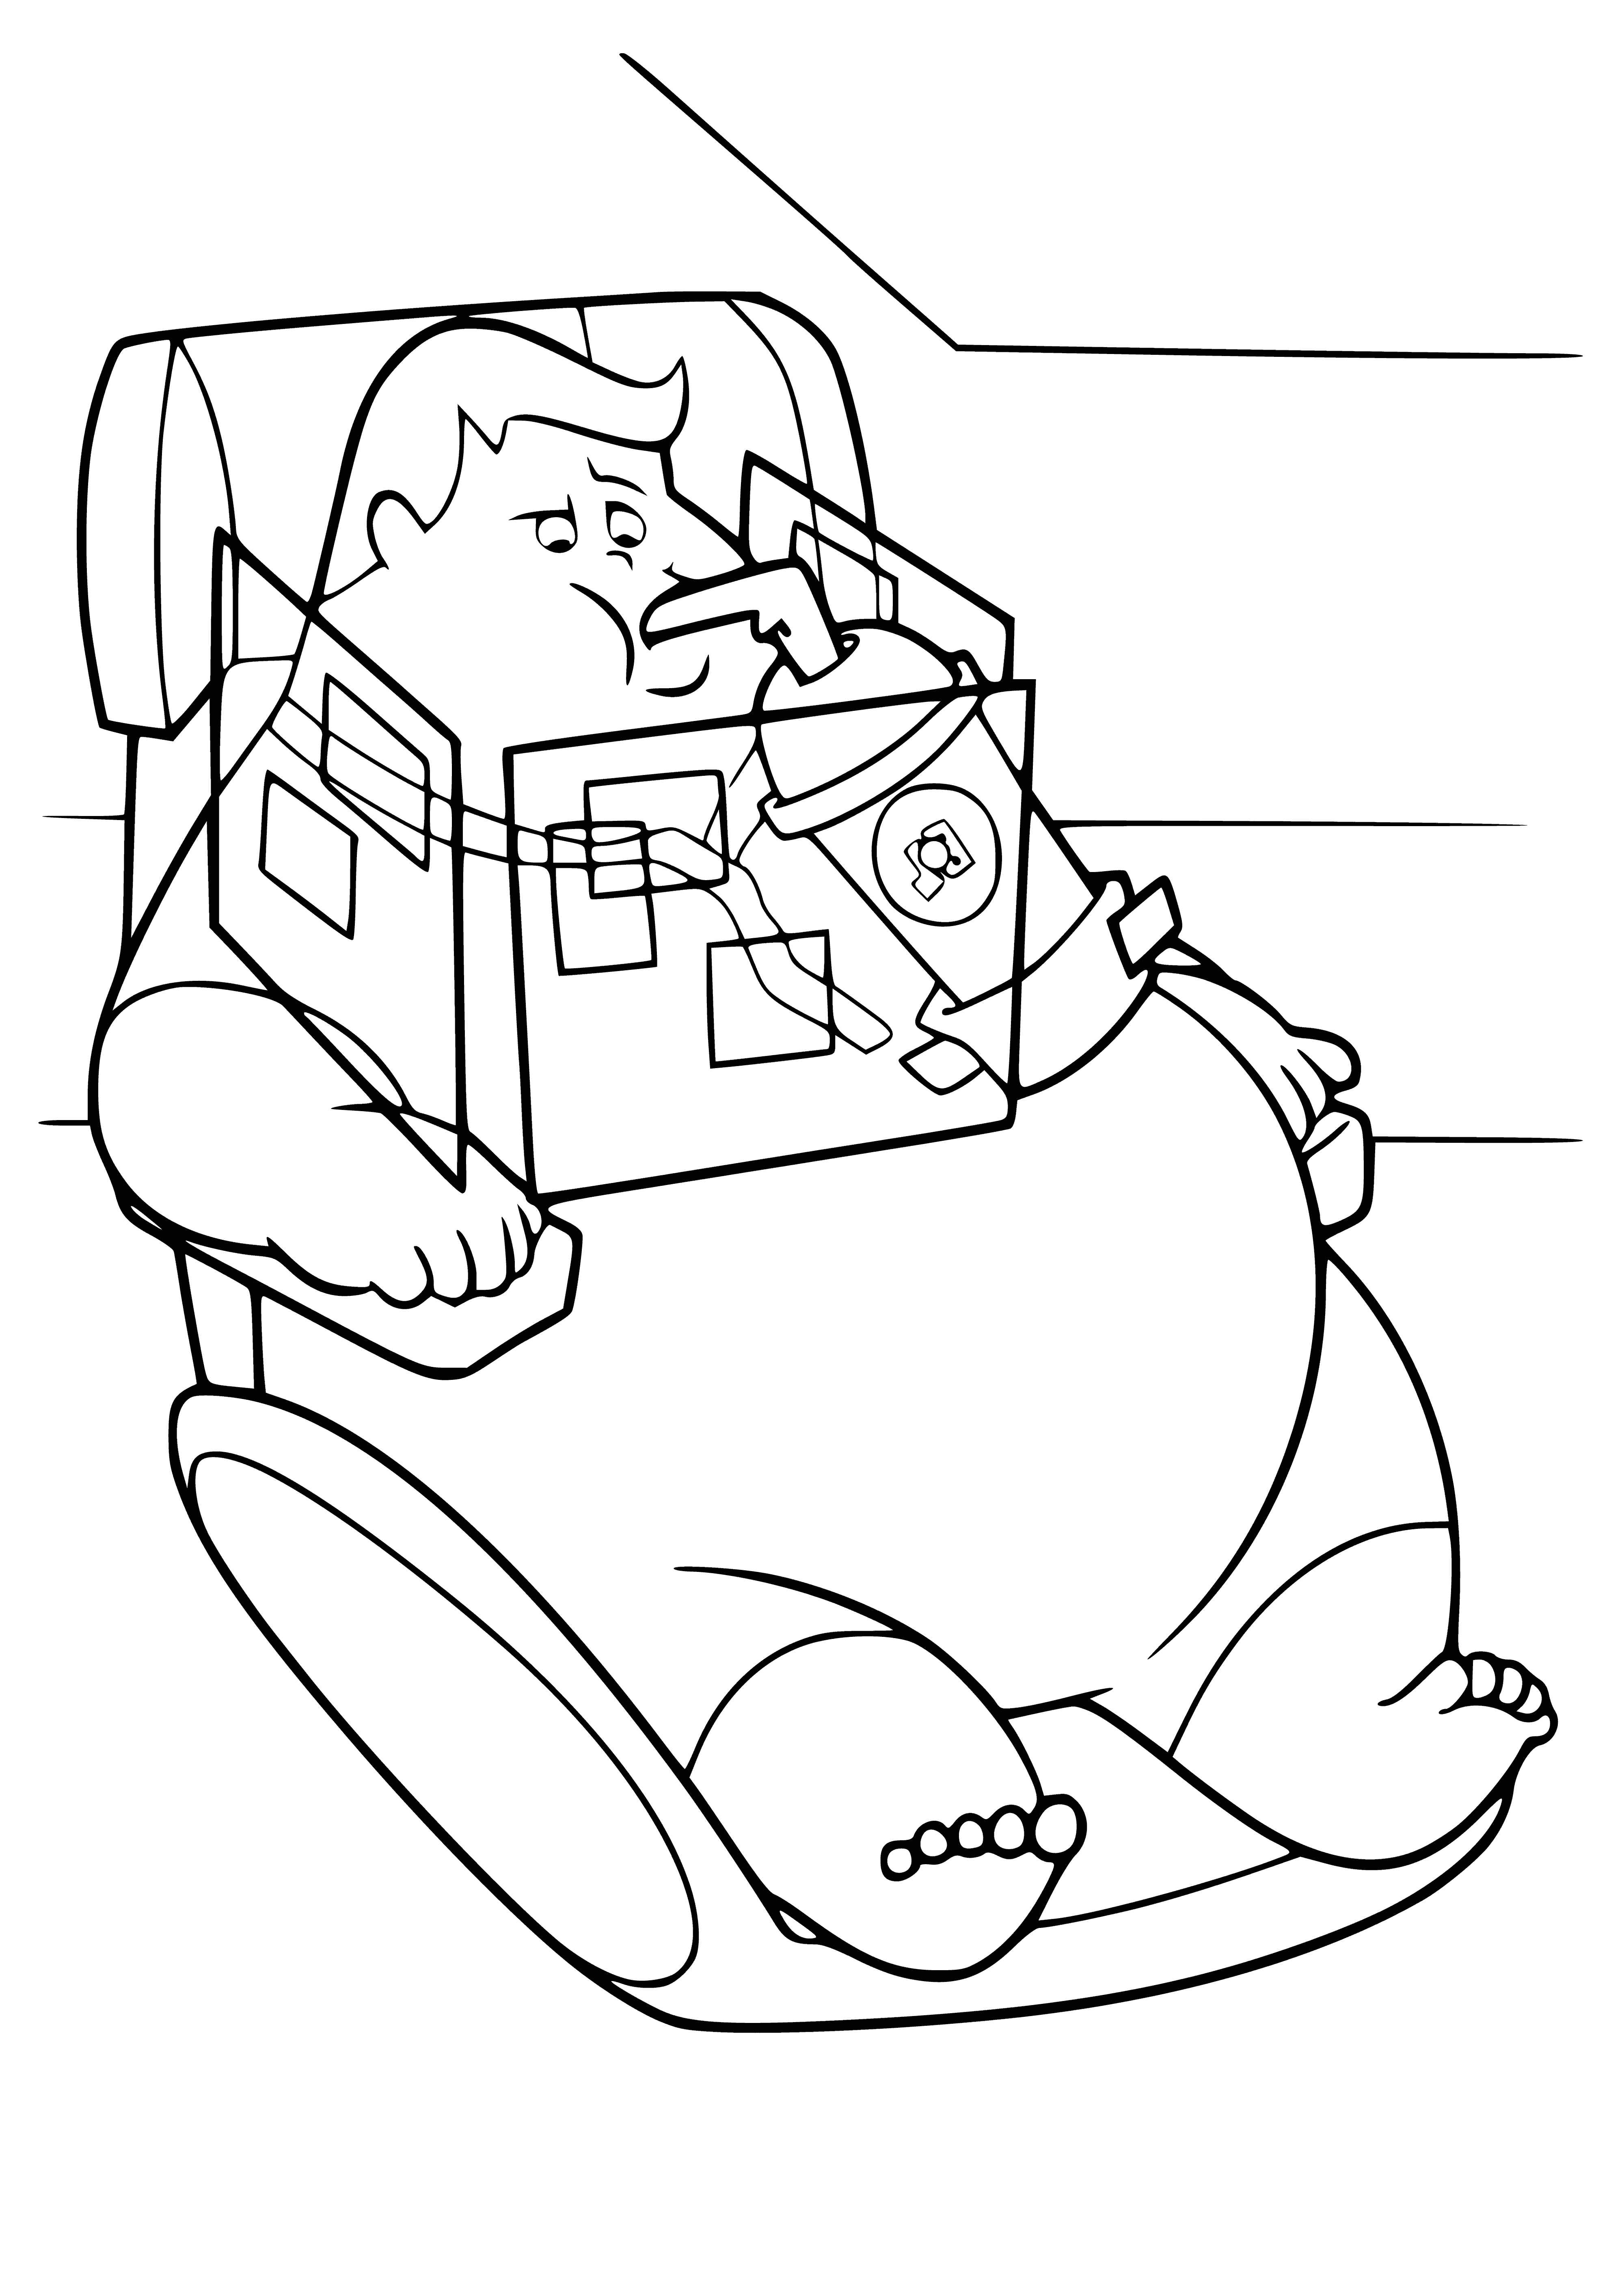 Fat man coloring page